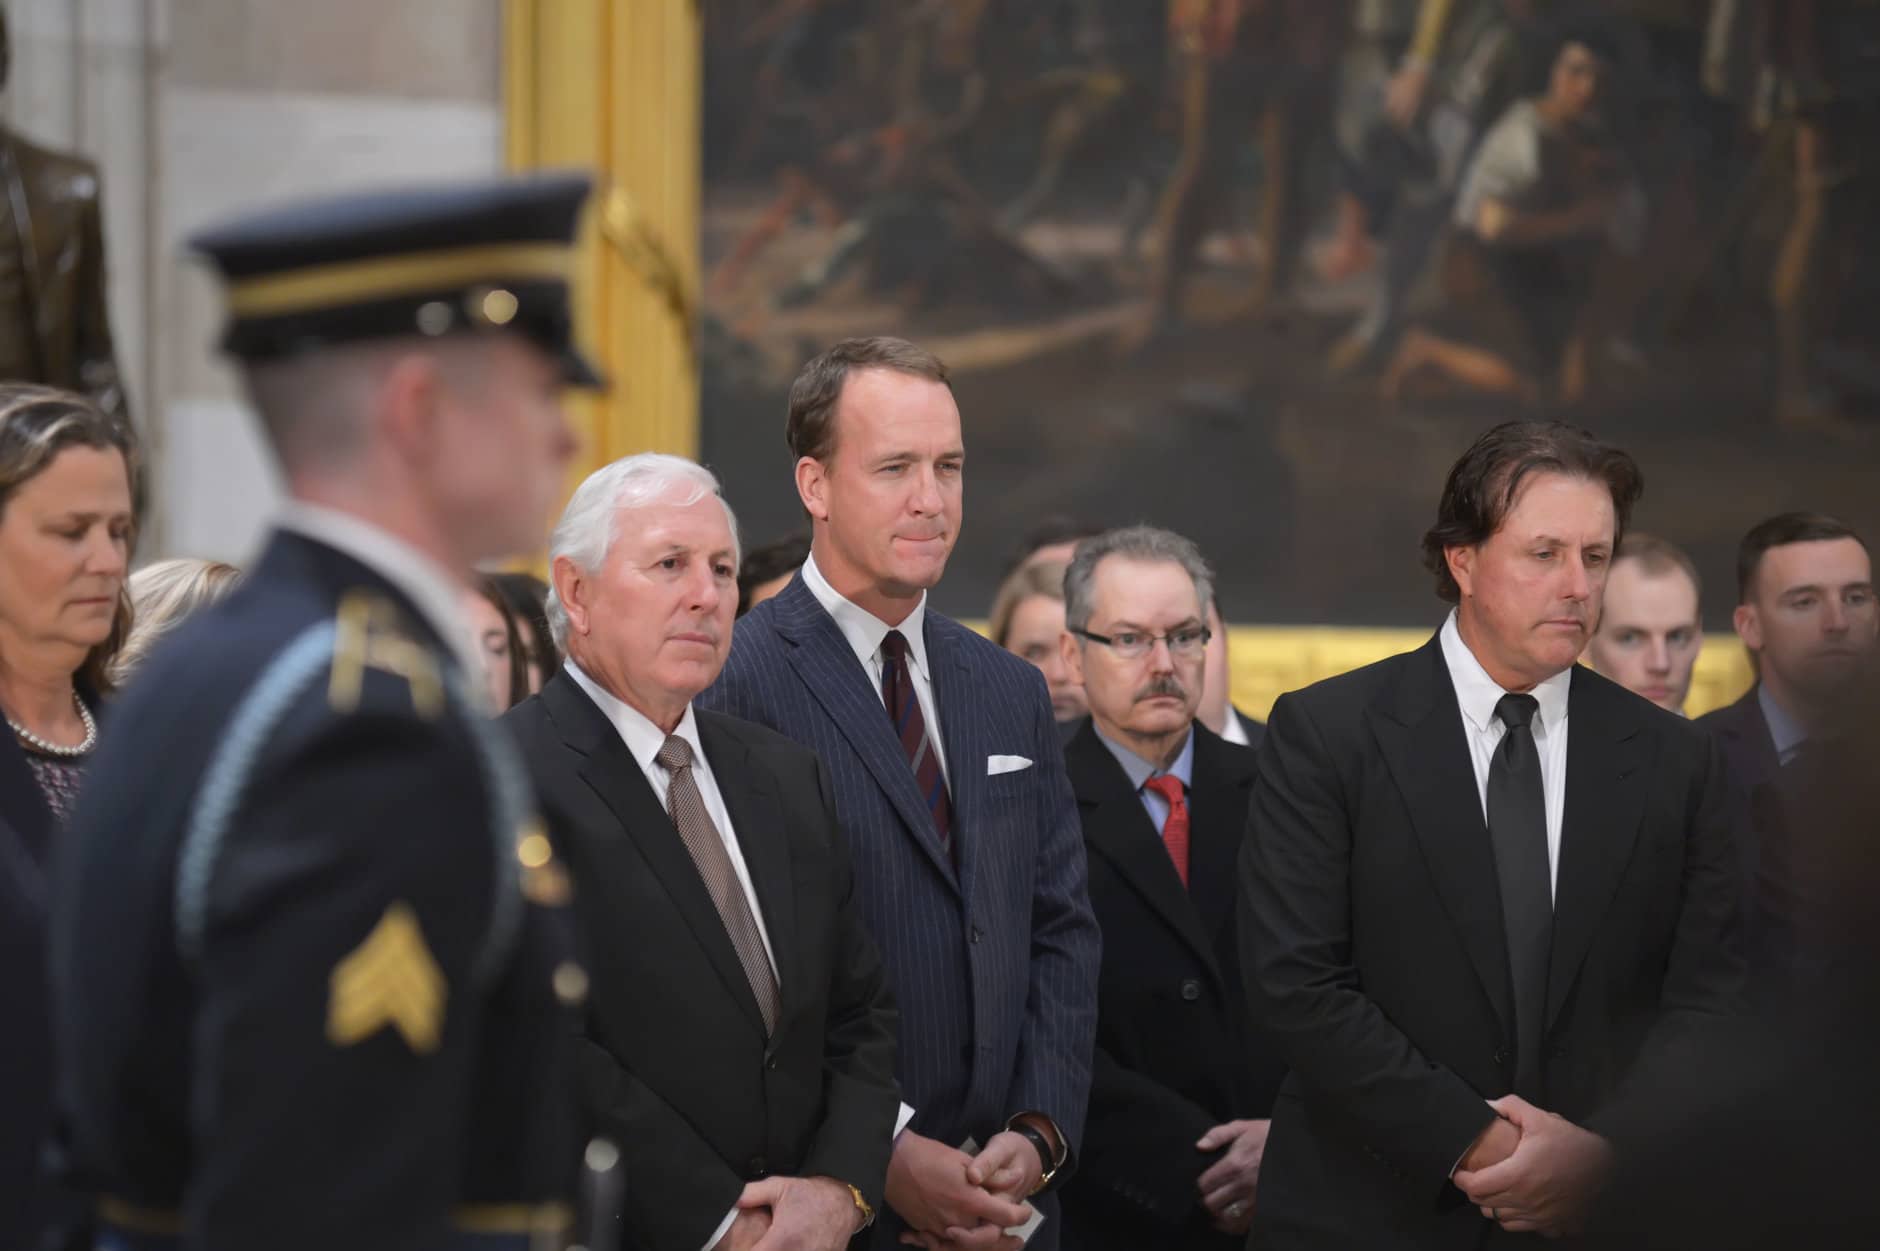 Golfer Hale Irwin, retired quarterback Peyton Manning and golfer Phil Mickelson attend the lying-in-state for the late President George H.W. Bush on December 4, 2018. (Courtesy Shannon Finney/<a href="https://www.shannonfinneyphotography.com/index" target="_blank" rel="noopener noreferrer">shannonfinneyphotography.com</a>)